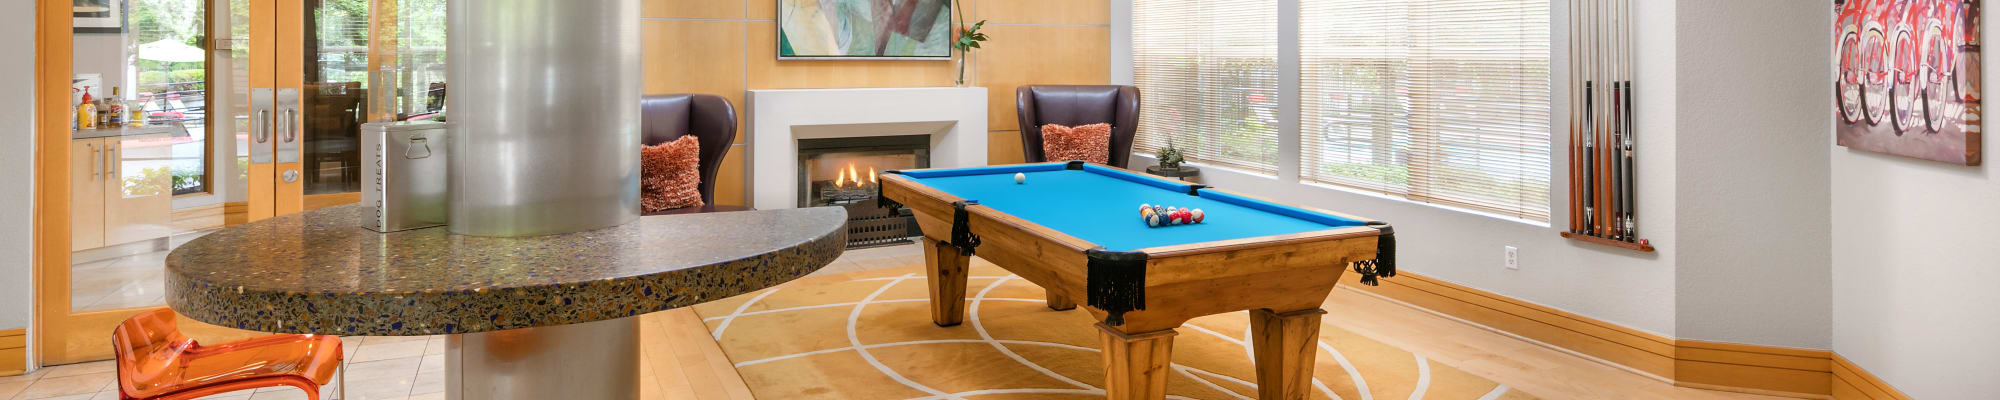 Amenities at Center Pointe Apartment Homes in Beaverton, Oregon